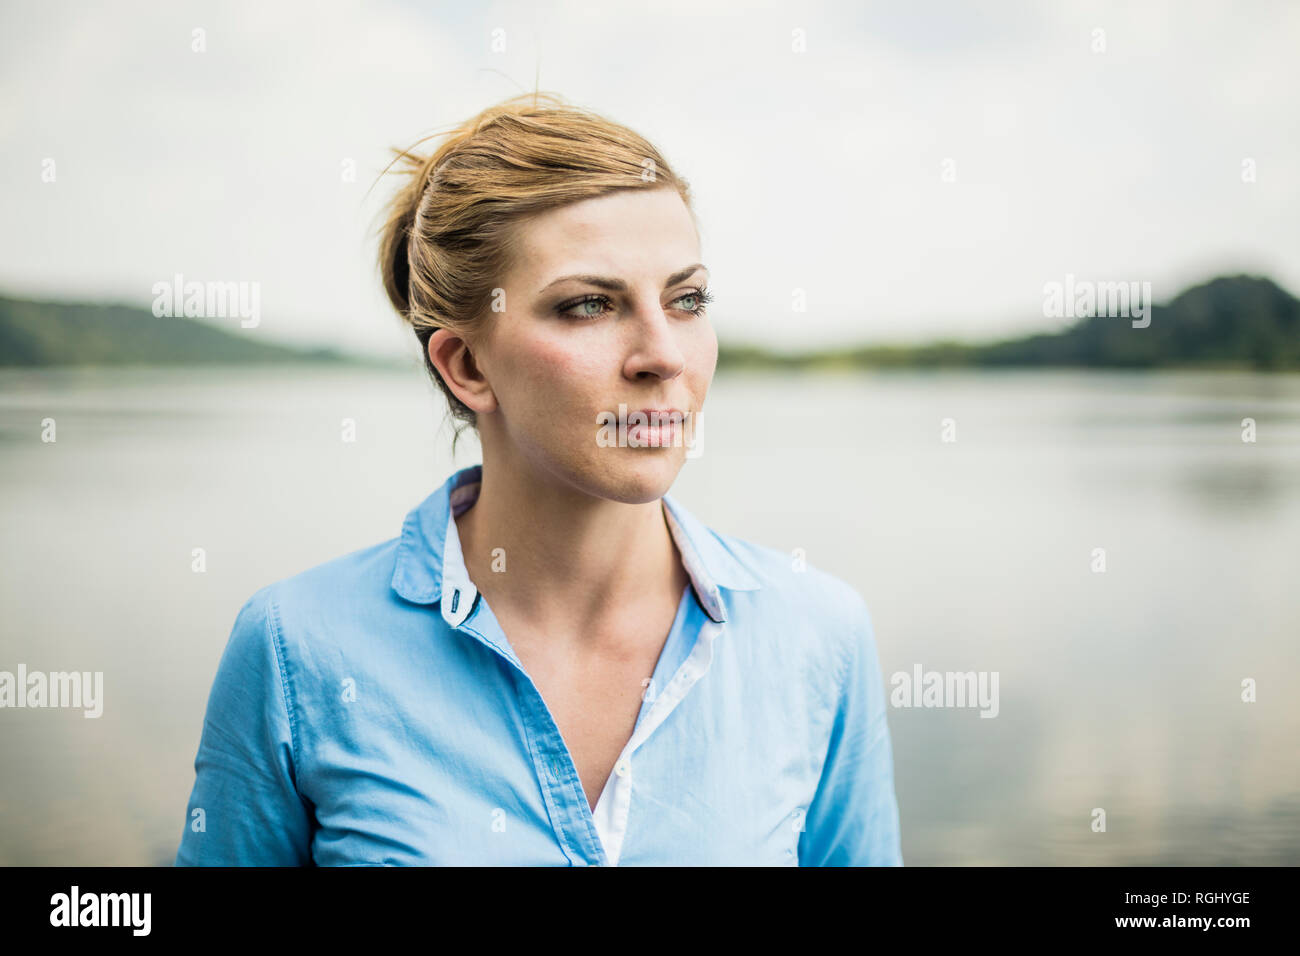 Portrait of woman at a lake looking sideways Stock Photo